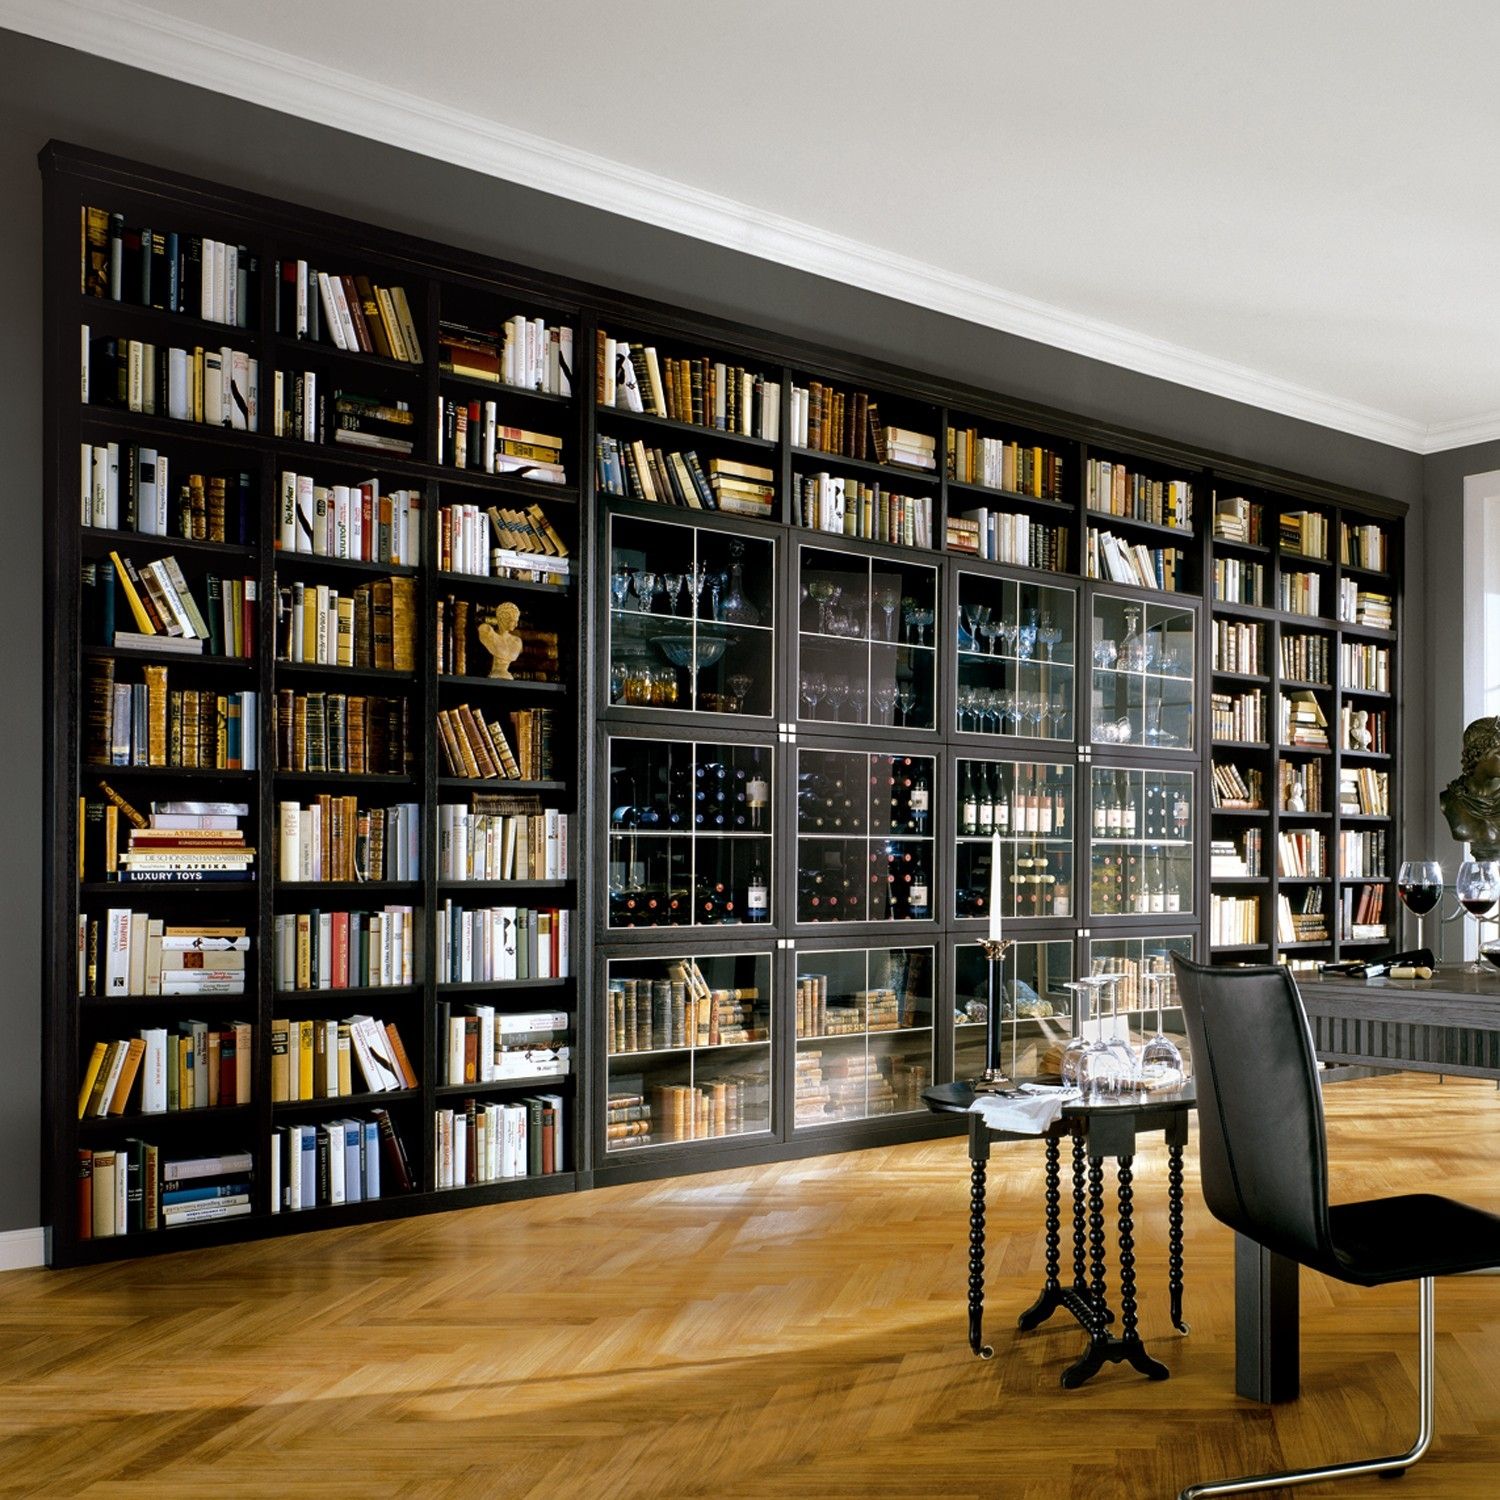 Awesome Pictures Of Book Shelves With Big Massive Bookshelves And Throughout Book Cupboard Designs (View 11 of 15)